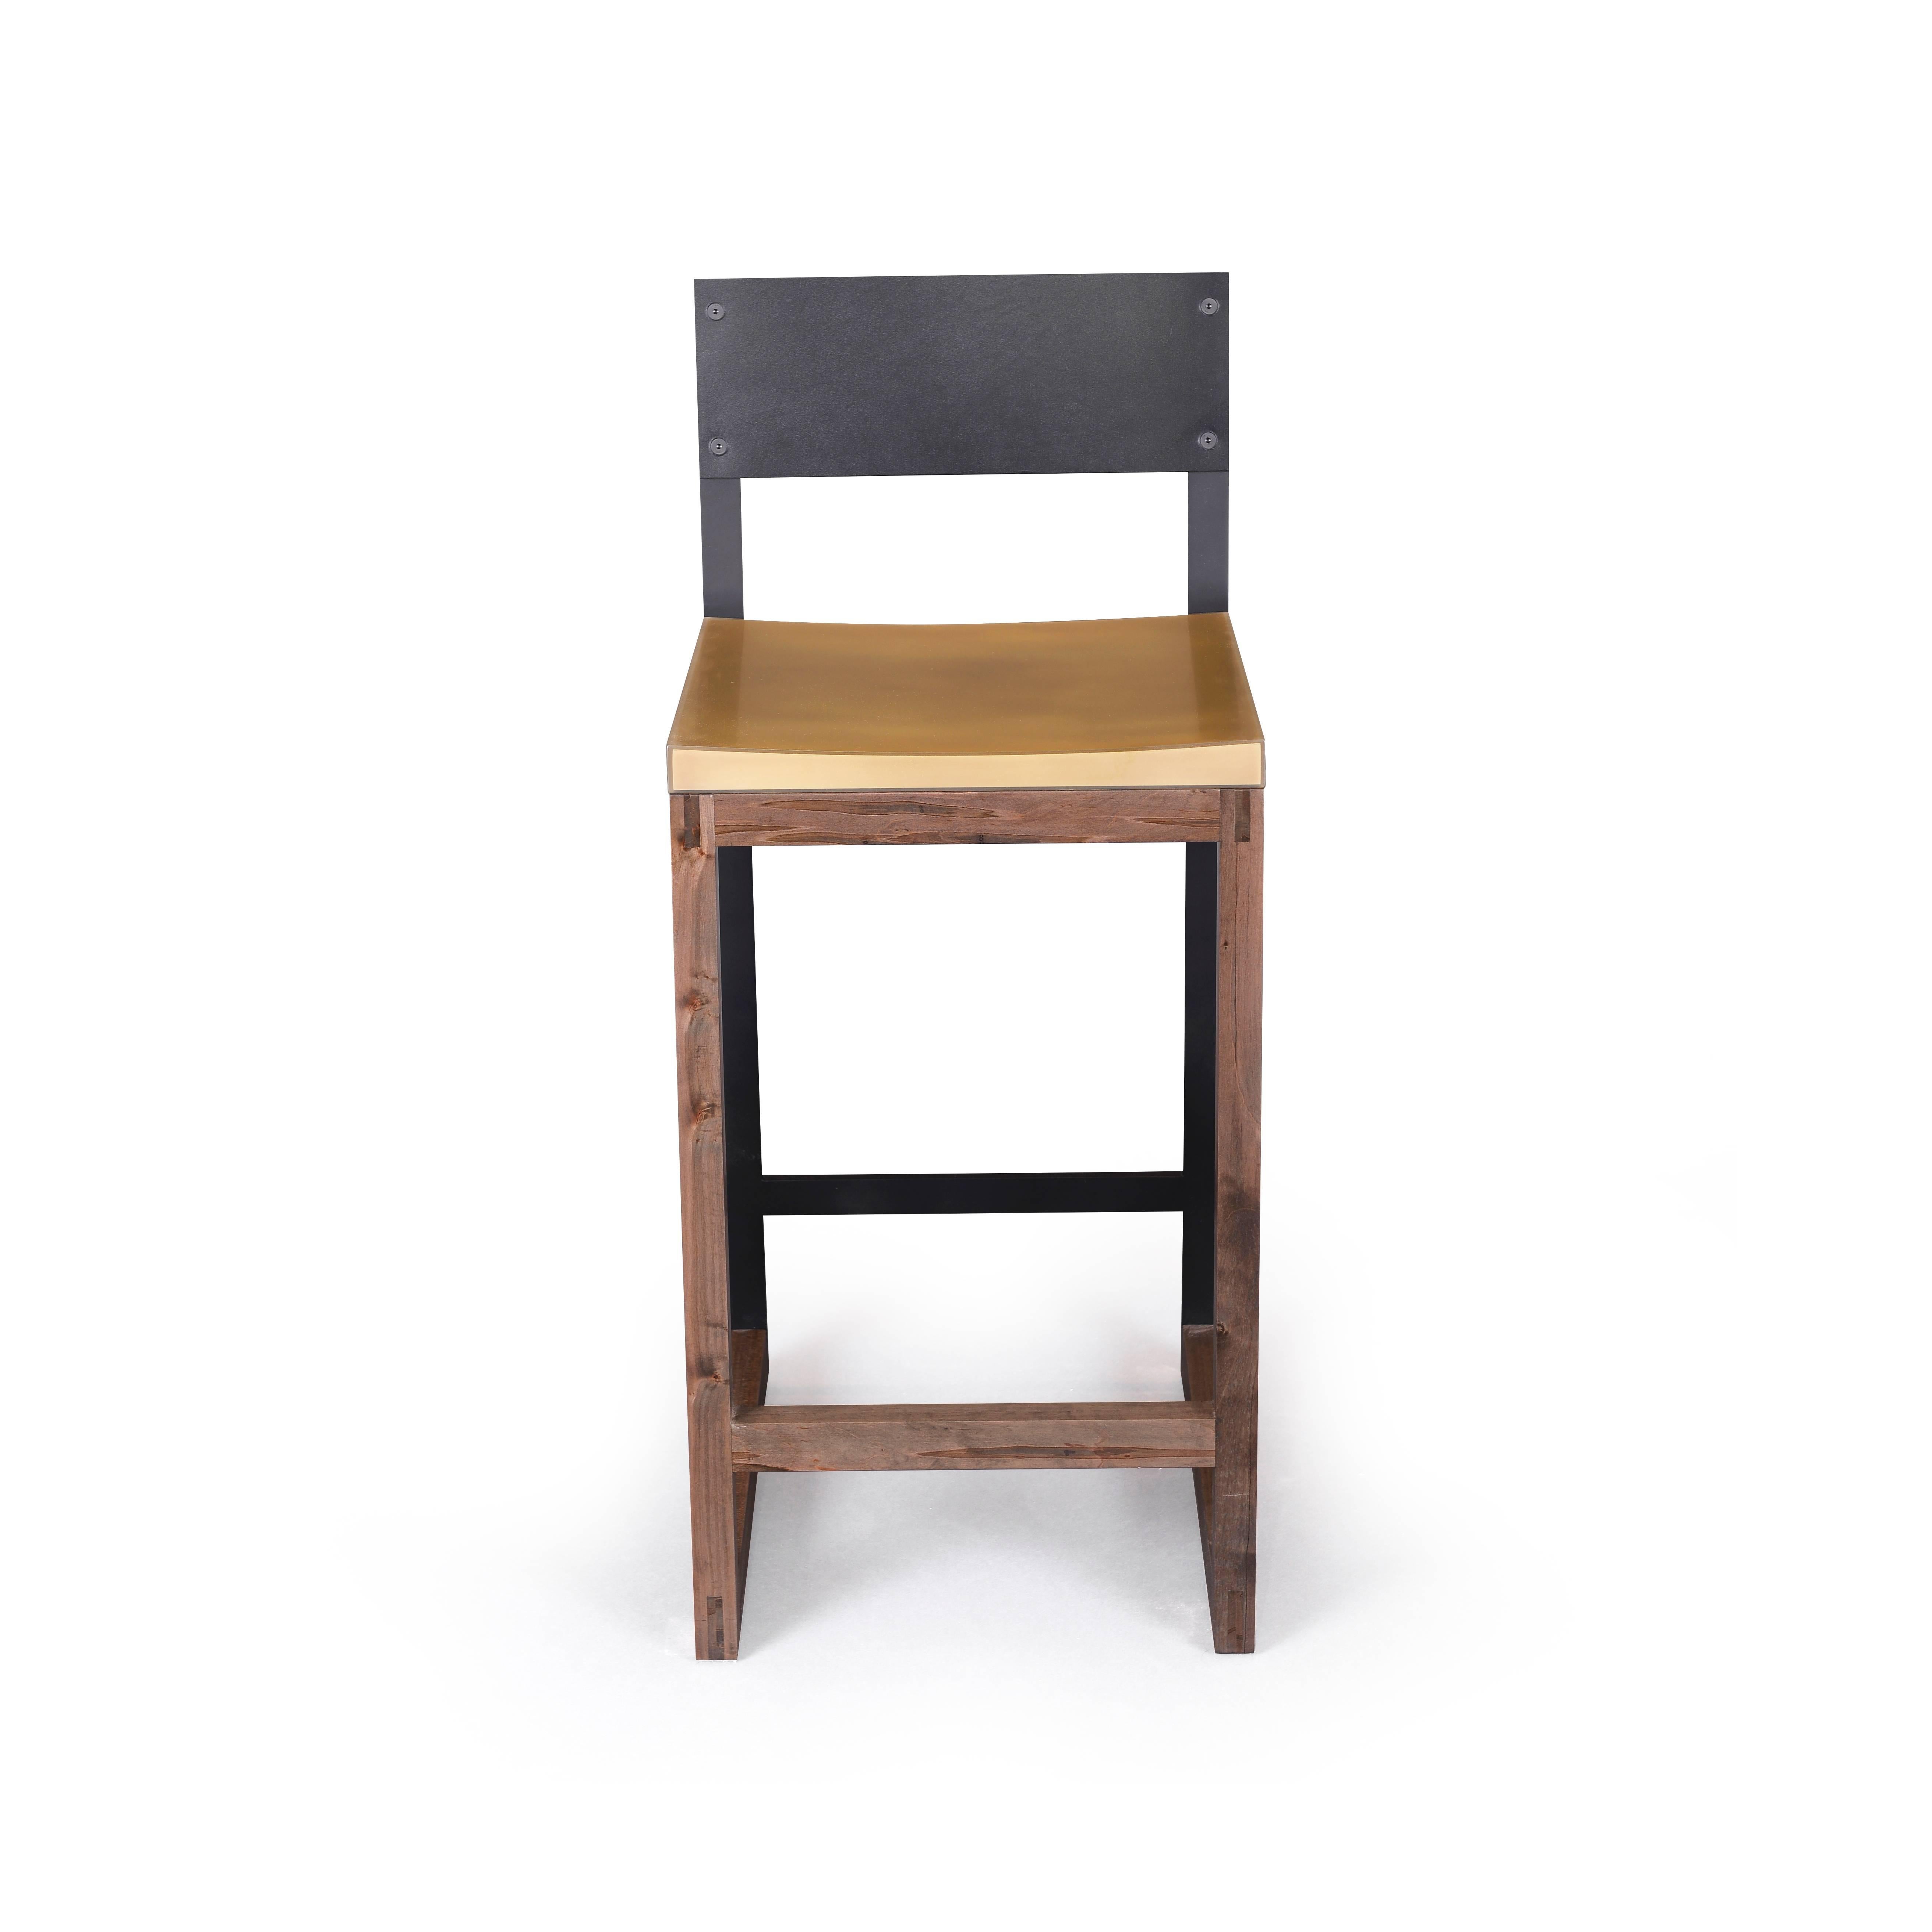 The sleek design of the gotham stool features a Bronze encased in epoxy resin seat, laminated soft black leather back, and an oxidized ambrosia maple base. The resin is extremely smooth and non-porous, making it ideal as a seat surface.

Can be